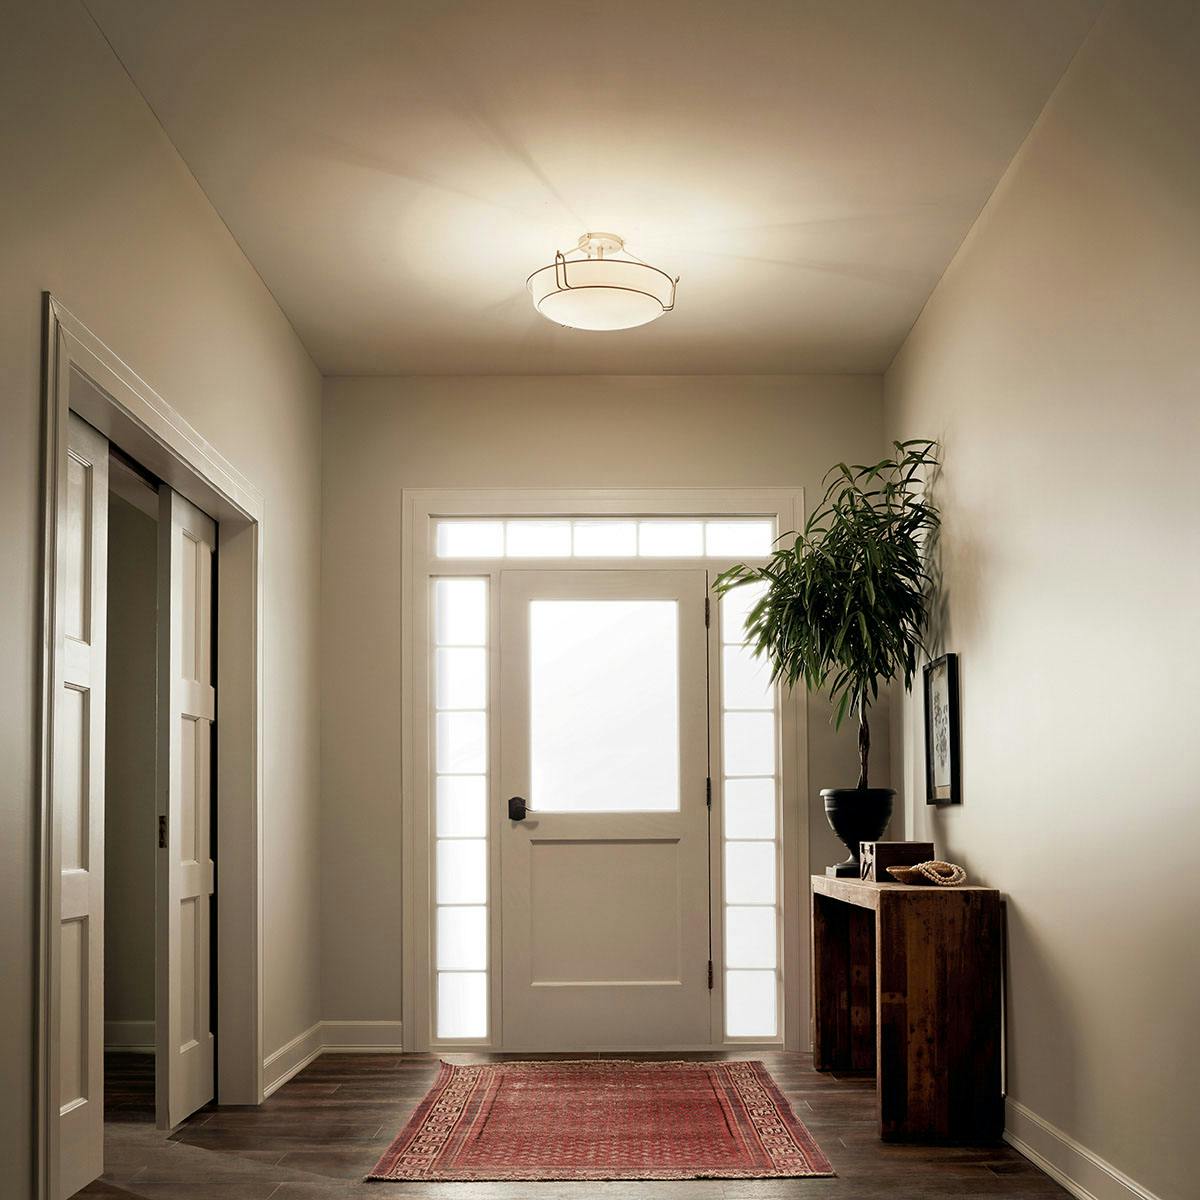 Day time Hallway image featuring Alkire flush mount light 44086NI